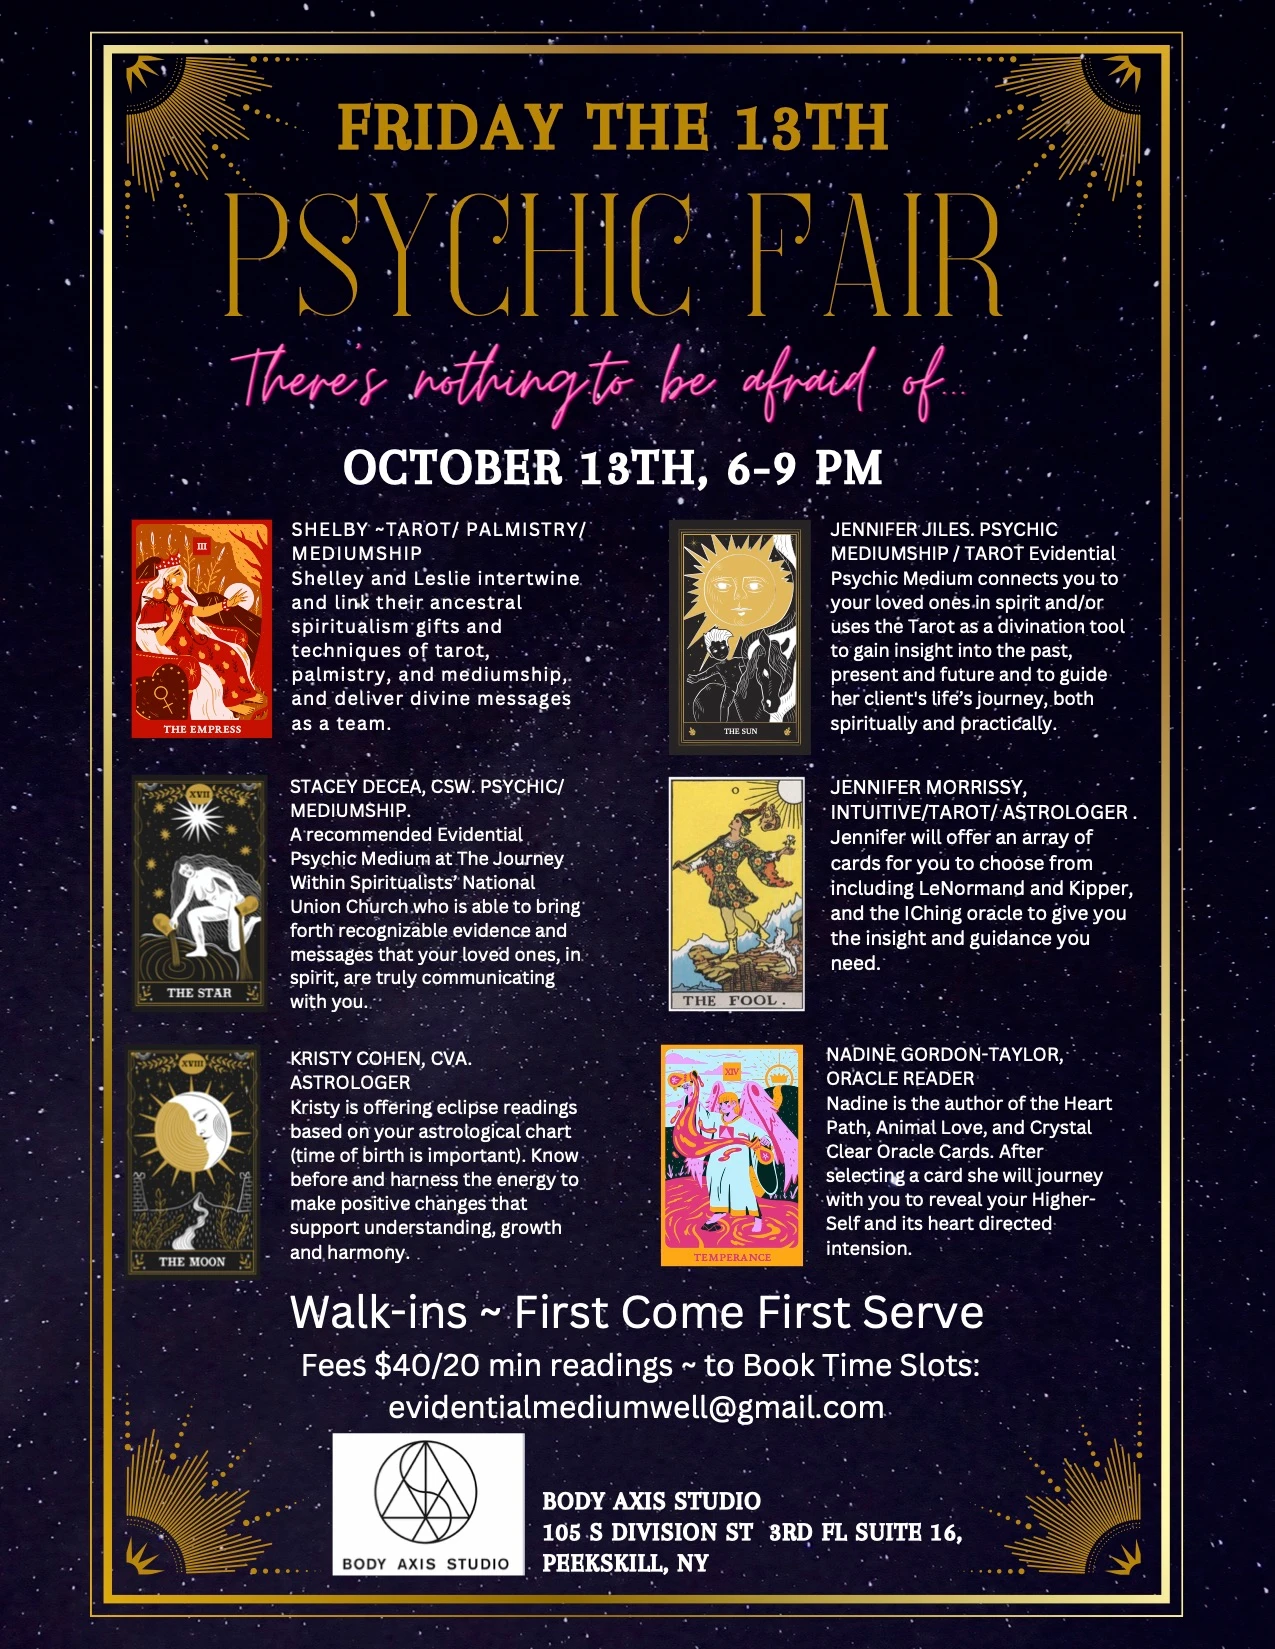 Flyer for Body Axis Friday the 13th Psychic Fair